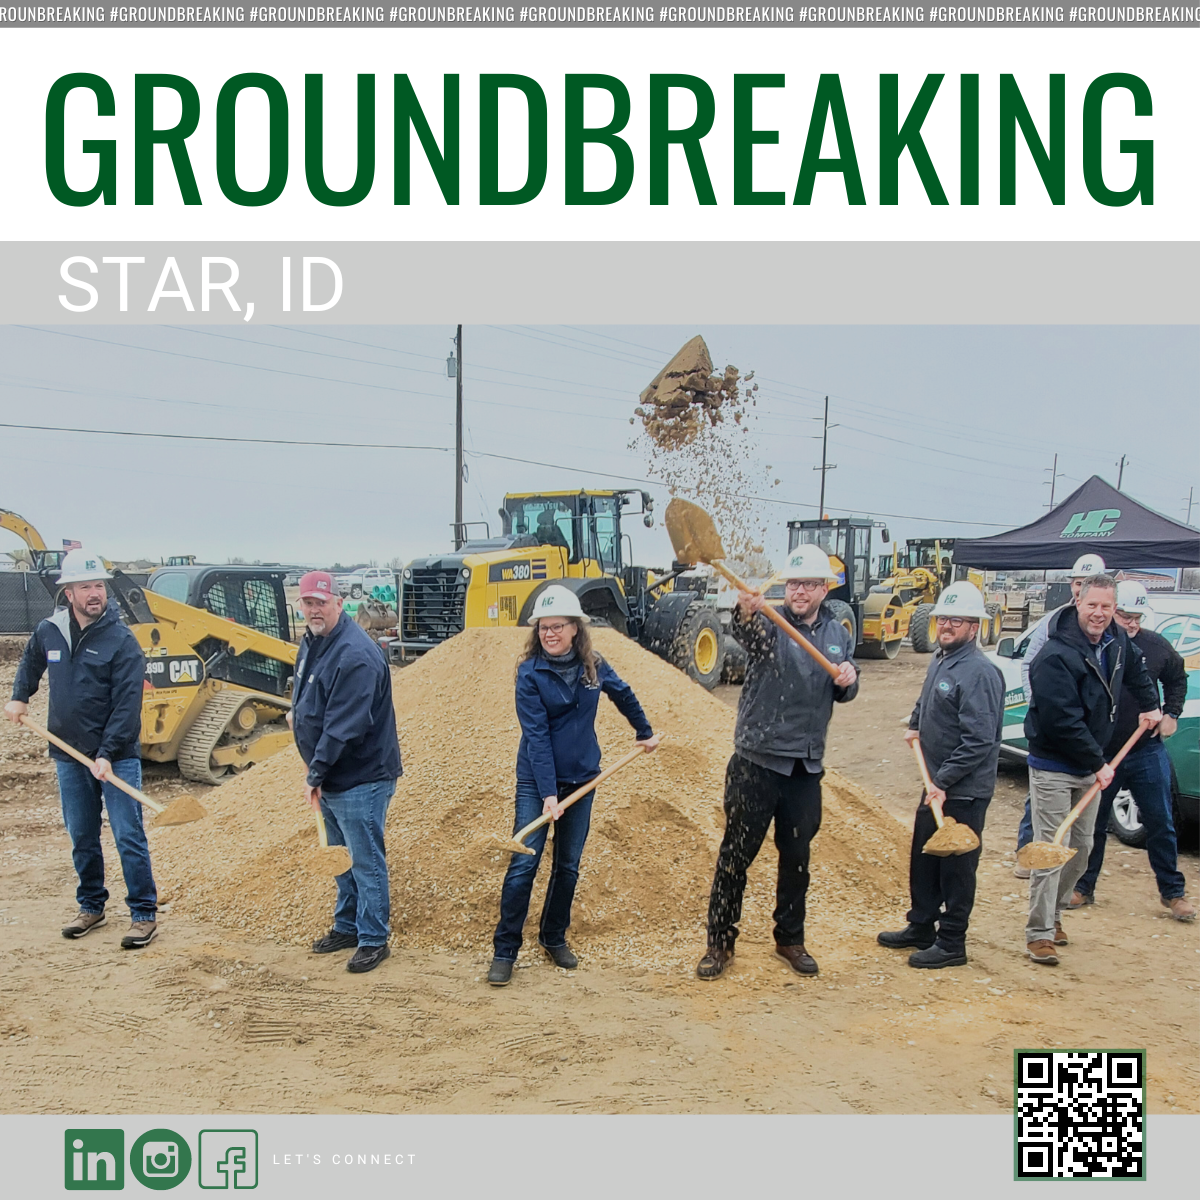 Christian Brothers Breaks Ground on their Newest Location in Star, Idaho